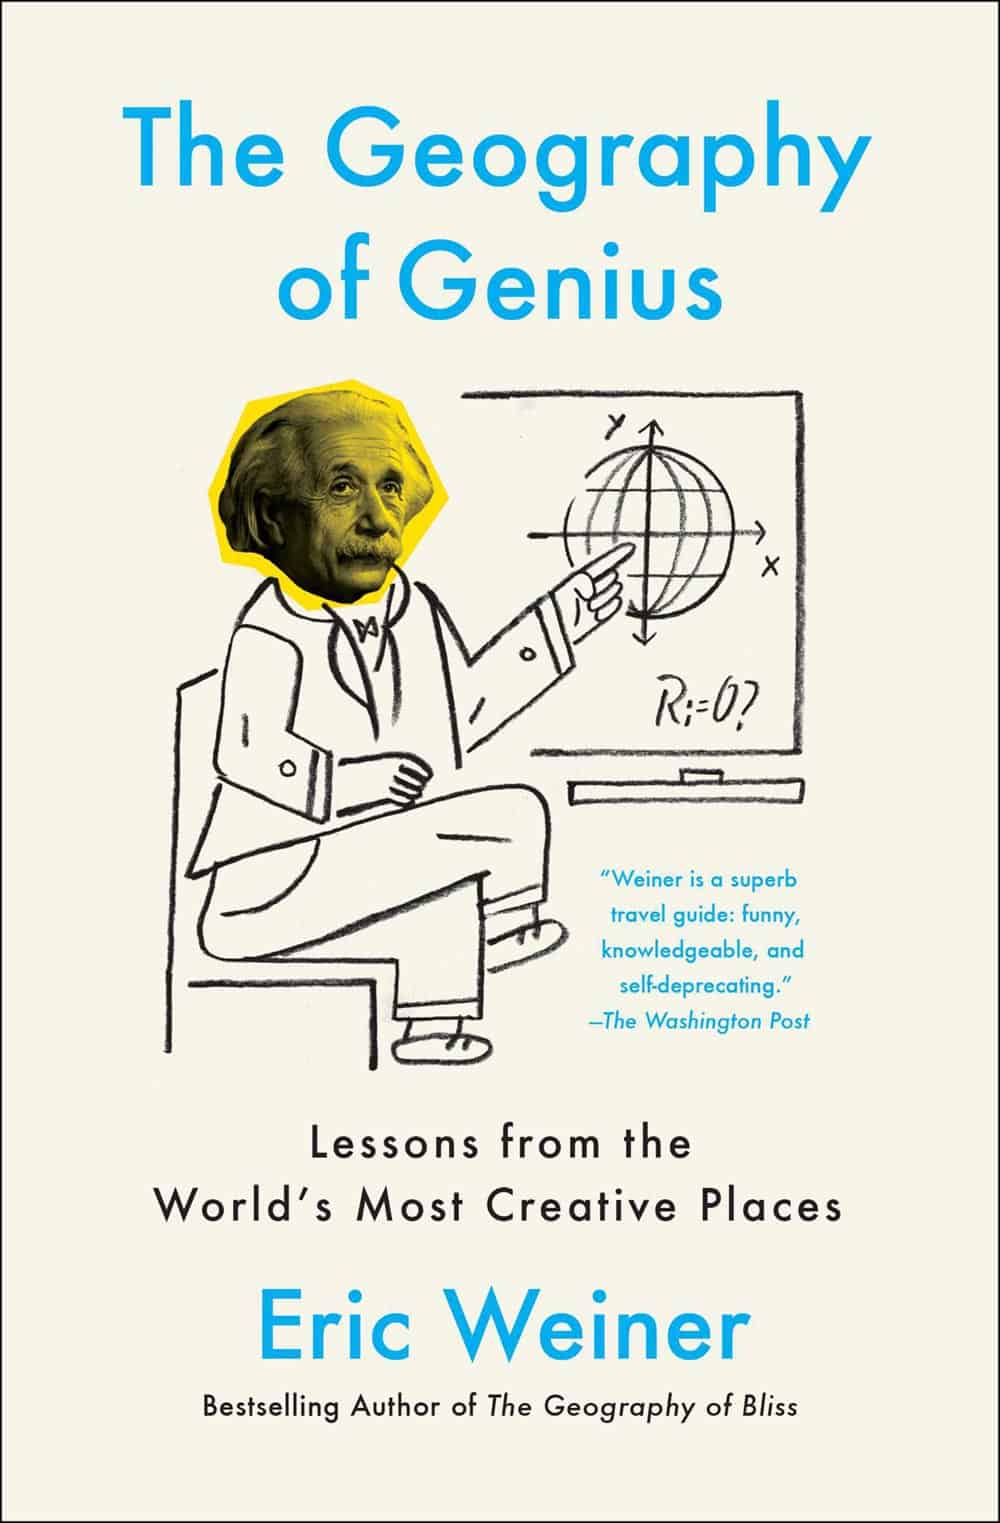 The Geography of Genius - Eric Weiner